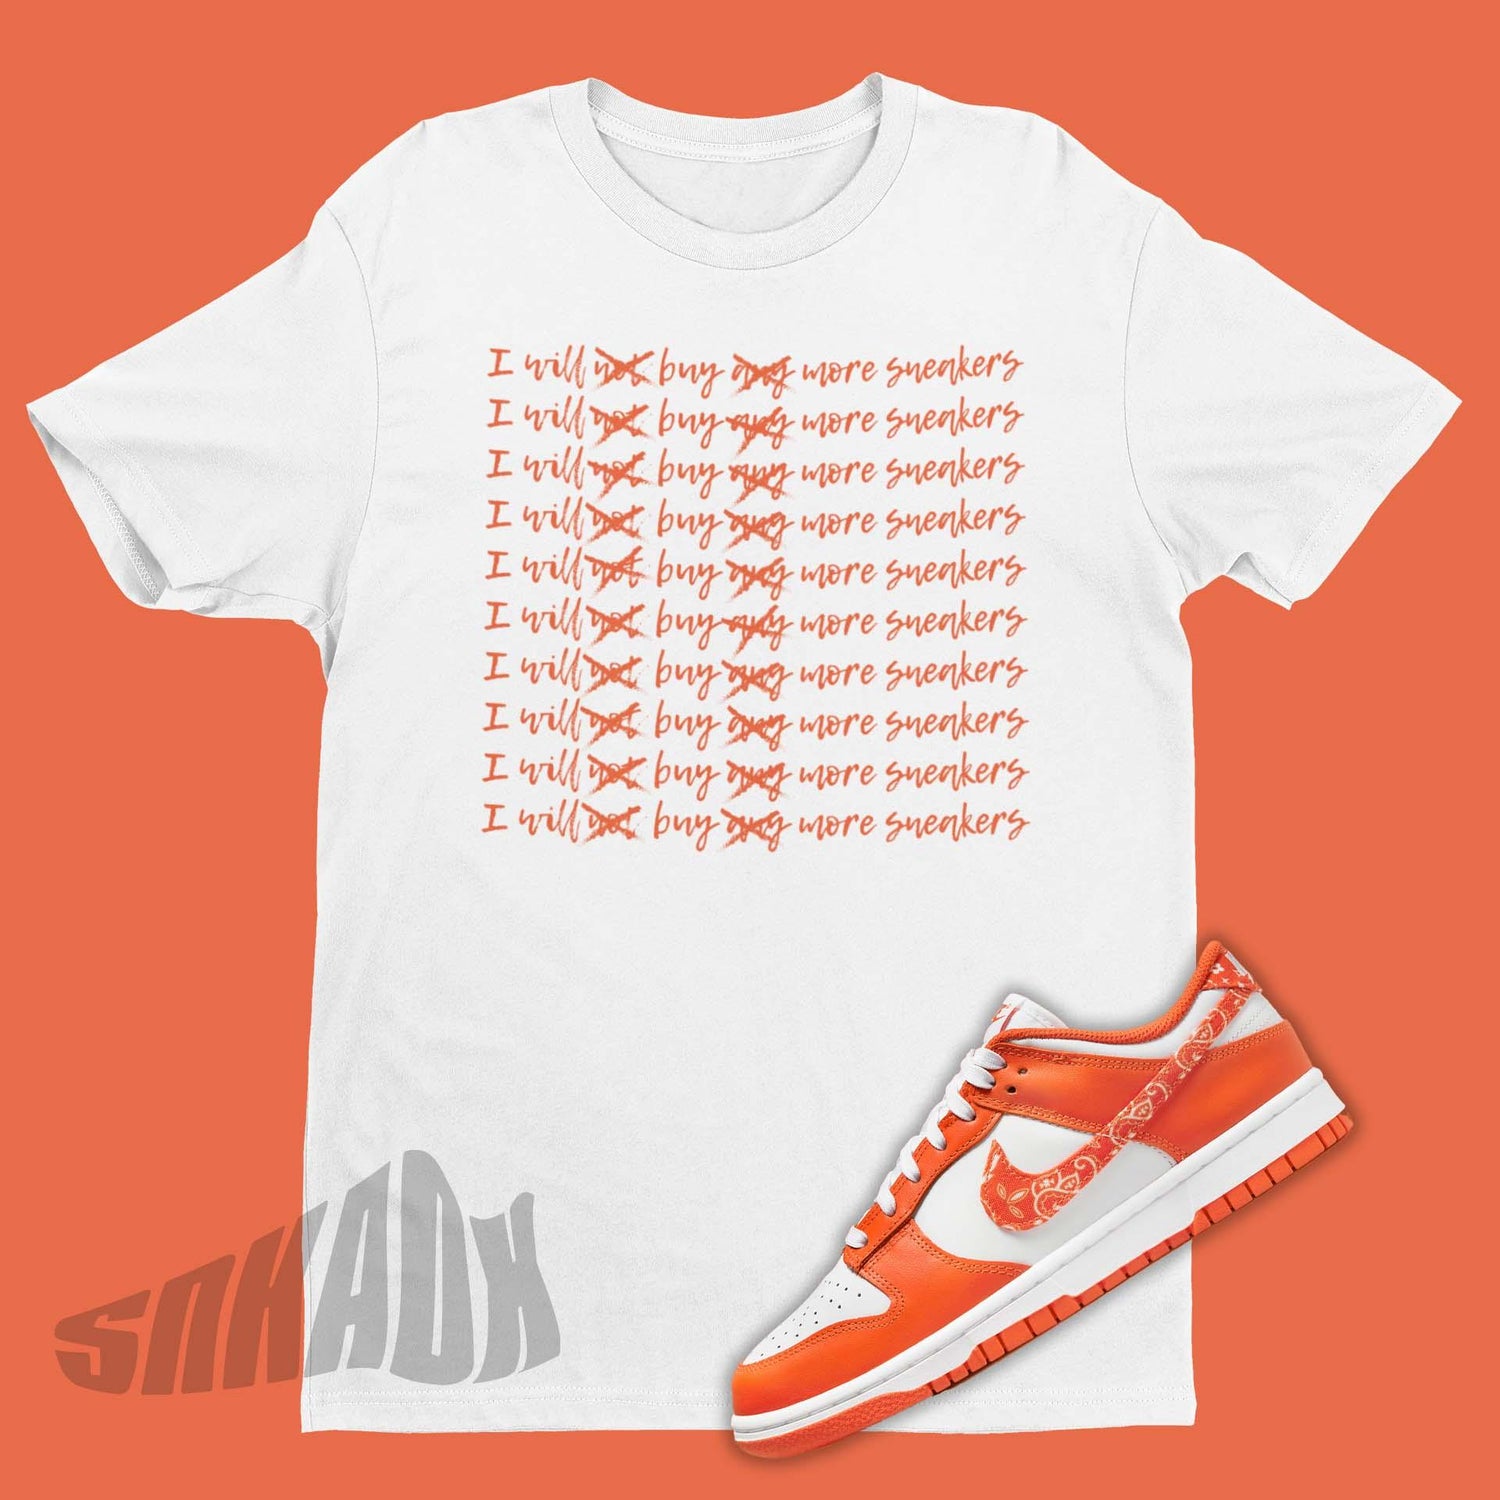 Funny Shirt To Match Nike Dunk Low Essential Paisley